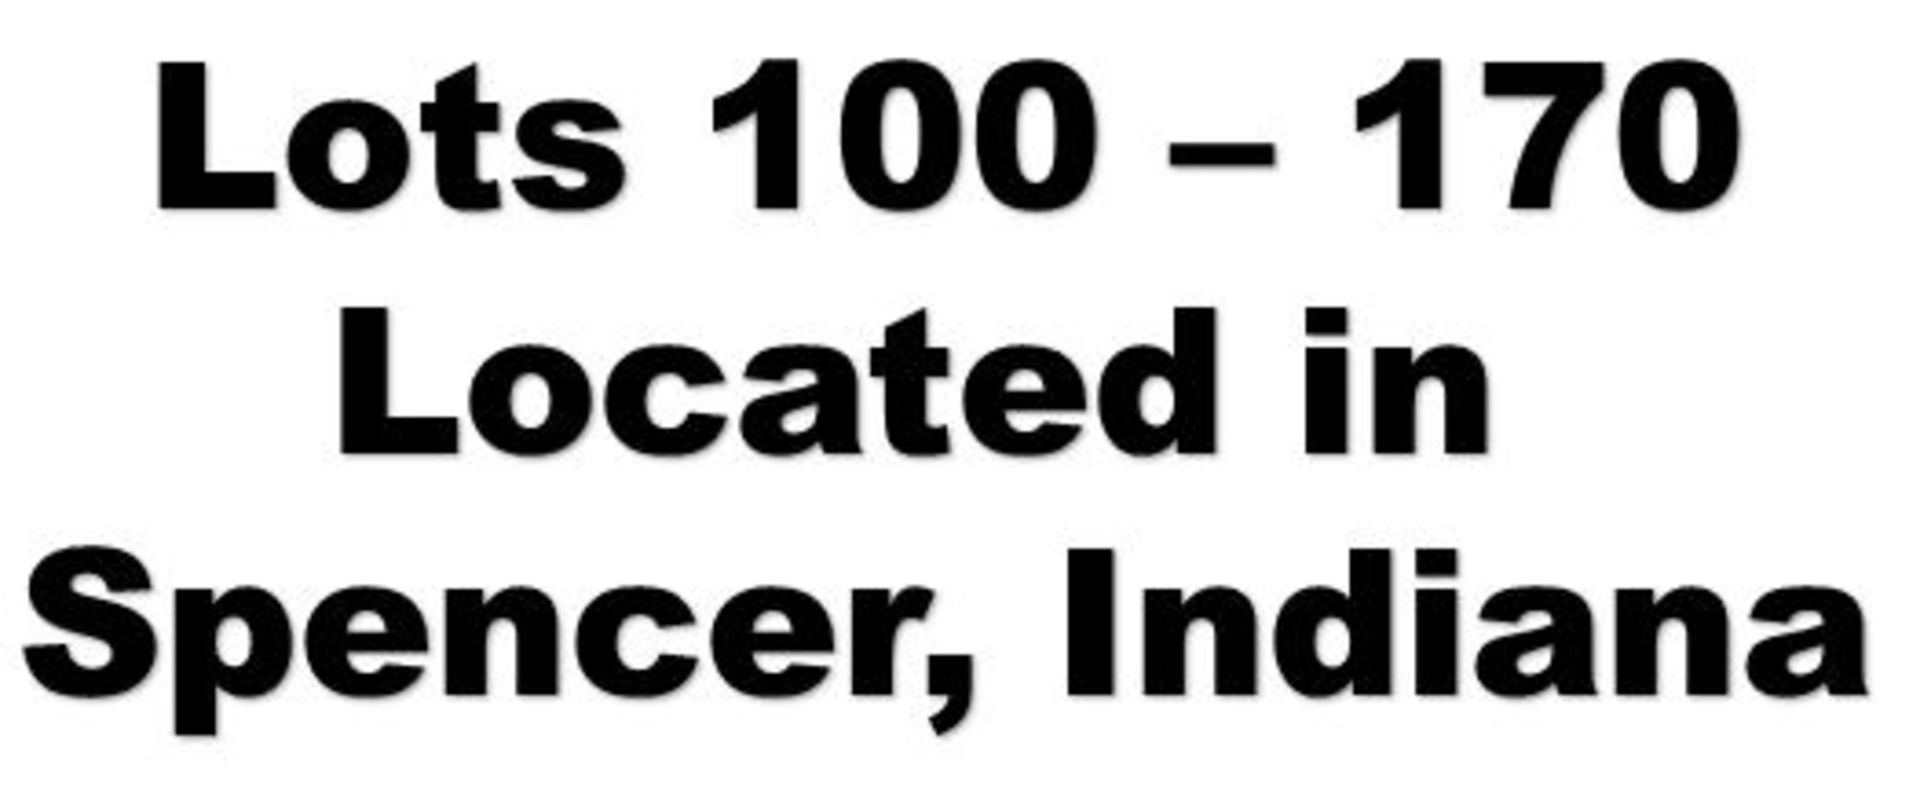 LOTS 100 - 170 ARE LOCATED IN SPENCER, INDIANA